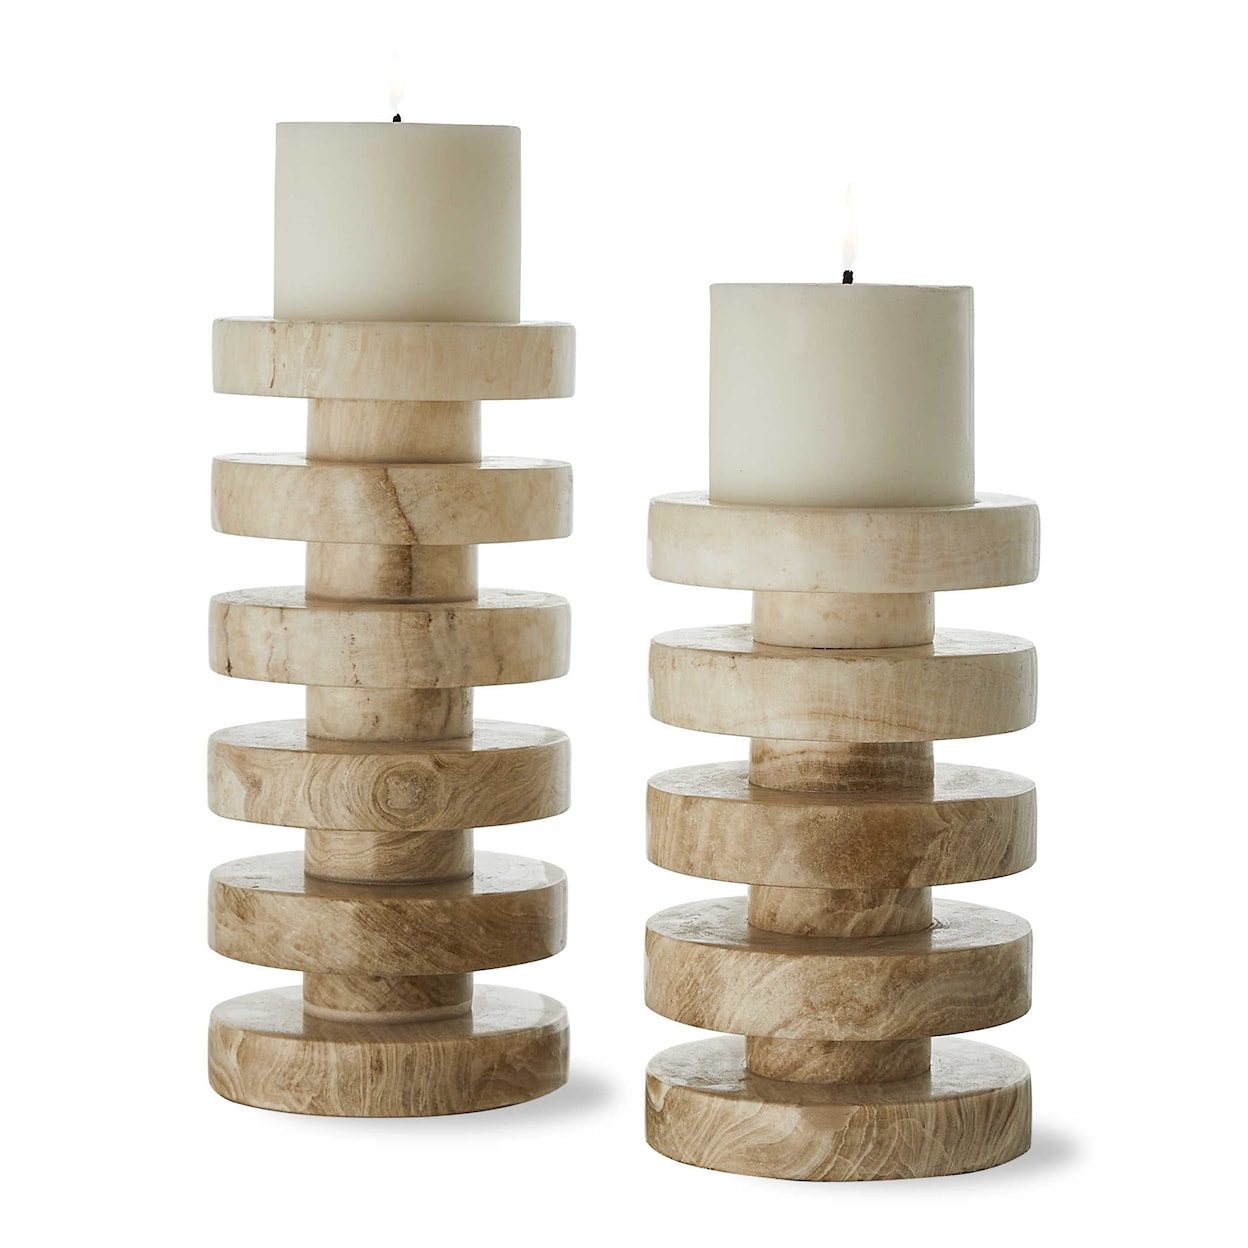 Uttermost Accessories - Candle Holders EMORA PILLAR CANDLEHOLDERS, S/2